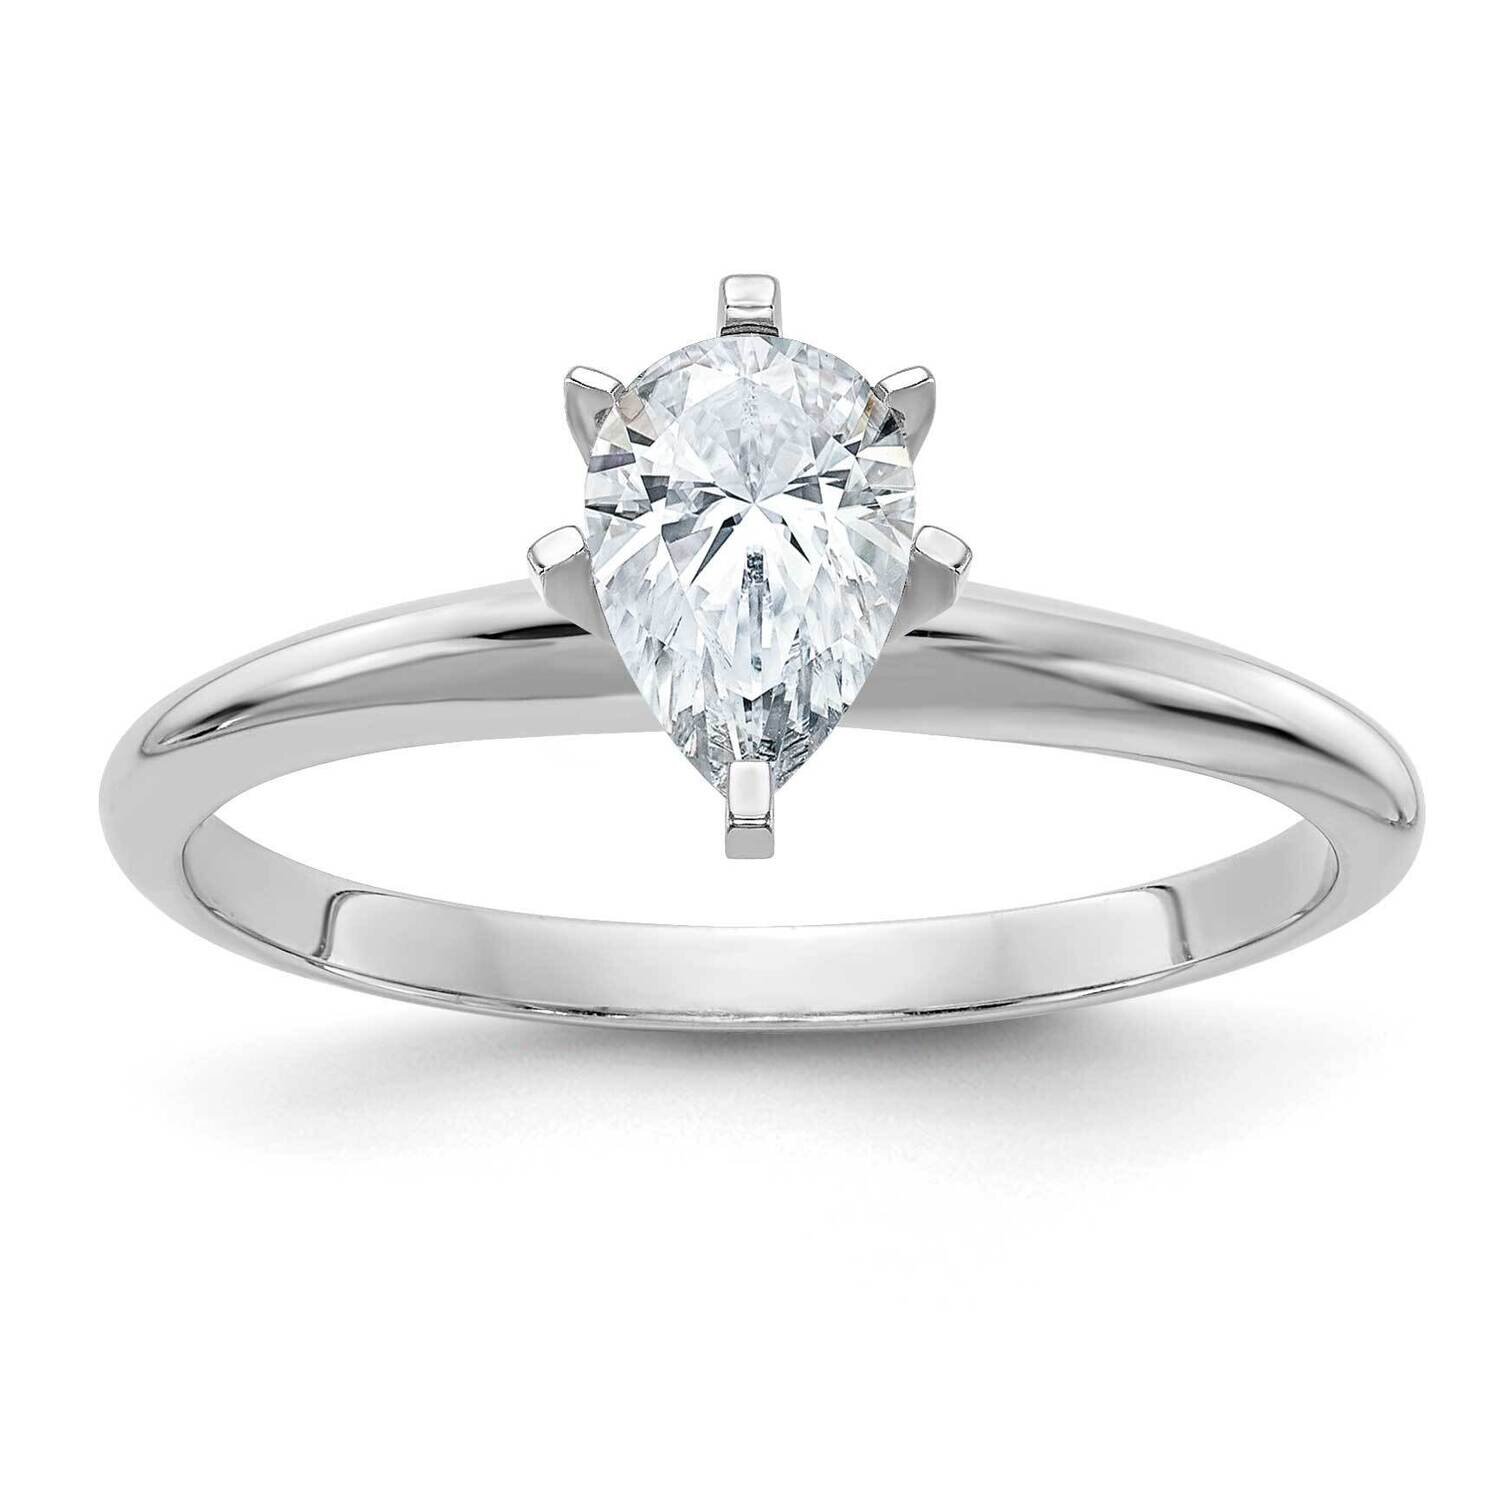 7/8ct. D E F Pure Light Pear Moissanite Solitaire Ring 14k White Gold WGSH15A-12MP-5